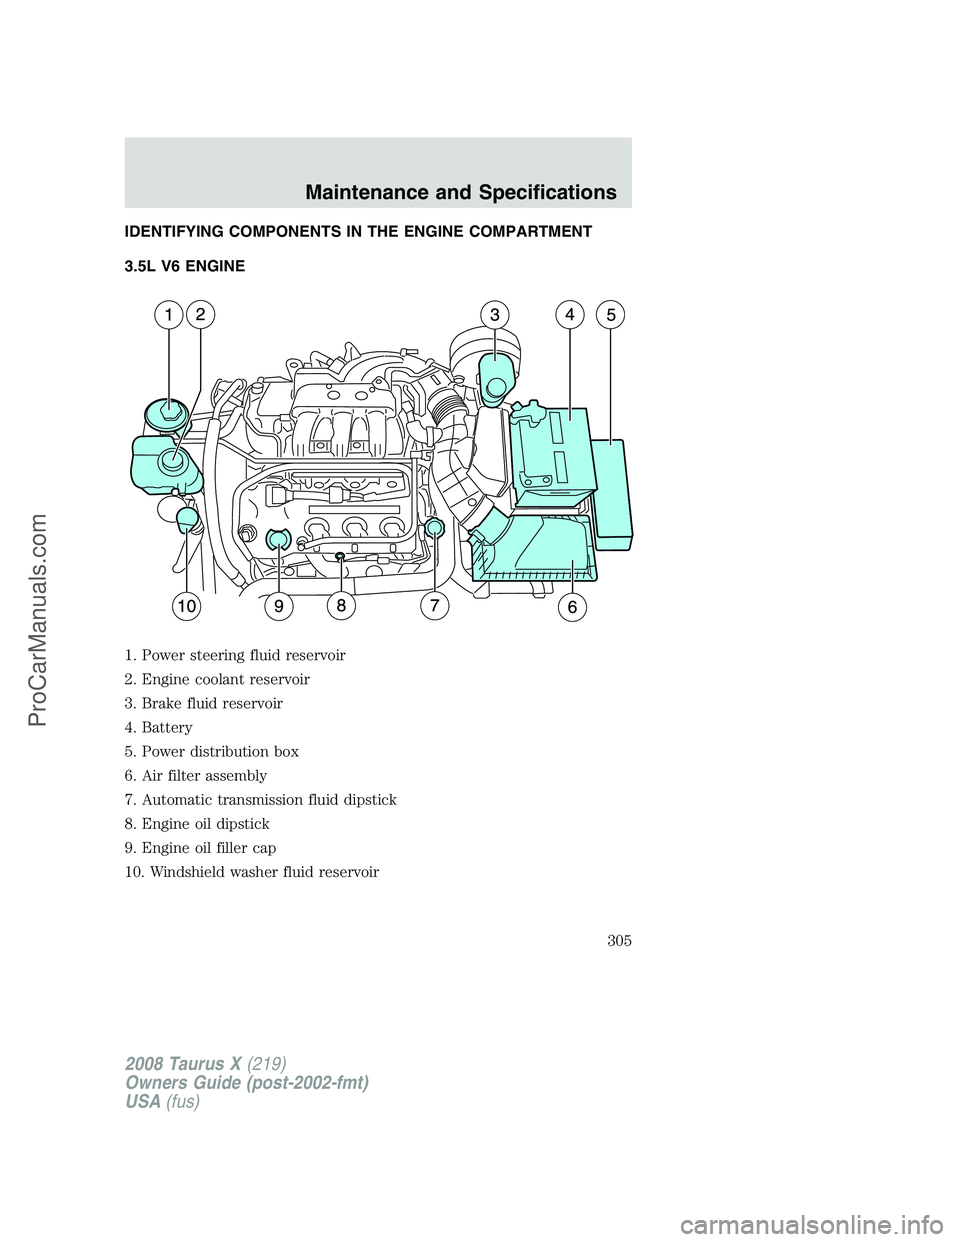 FORD FREESTYLE 2008  Owners Manual IDENTIFYING COMPONENTS IN THE ENGINE COMPARTMENT
3.5L V6 ENGINE
1. Power steering fluid reservoir
2. Engine coolant reservoir
3. Brake fluid reservoir
4. Battery
5. Power distribution box
6. Air filte